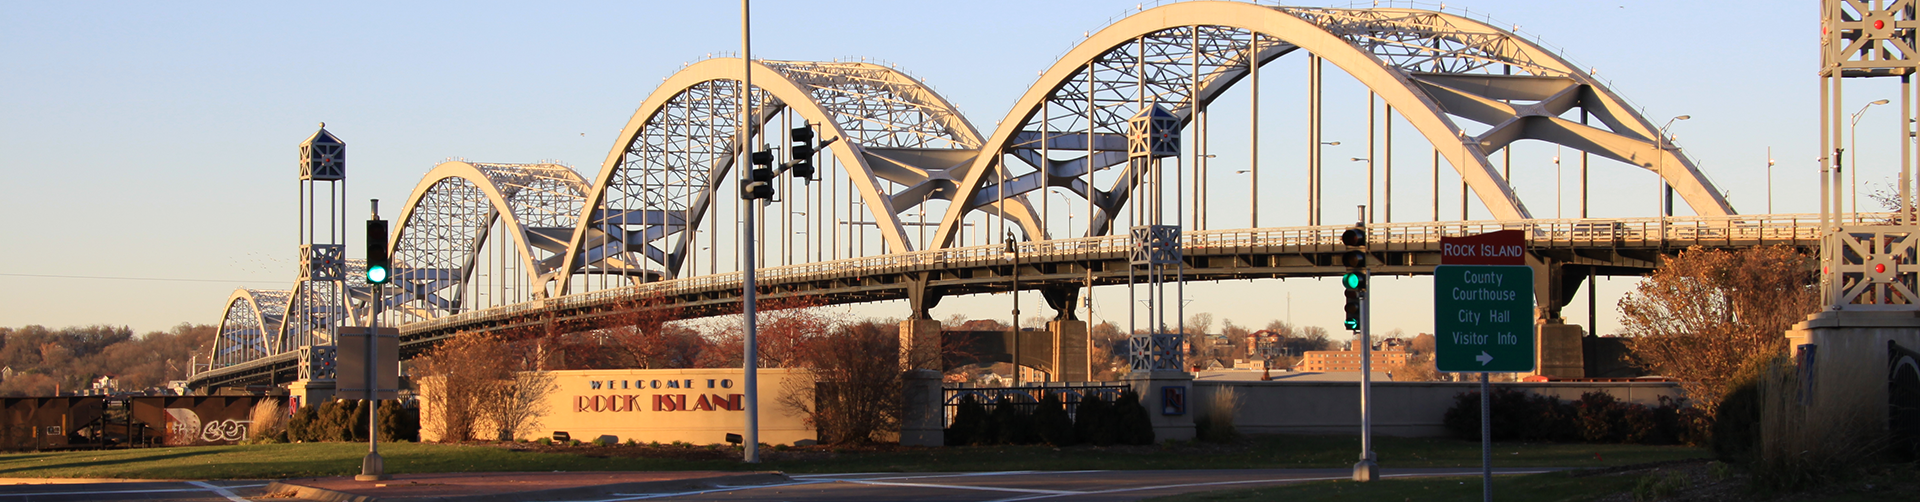 Photo of the Centennial Bridge with a Welcome to Rock Island sign in the foreground